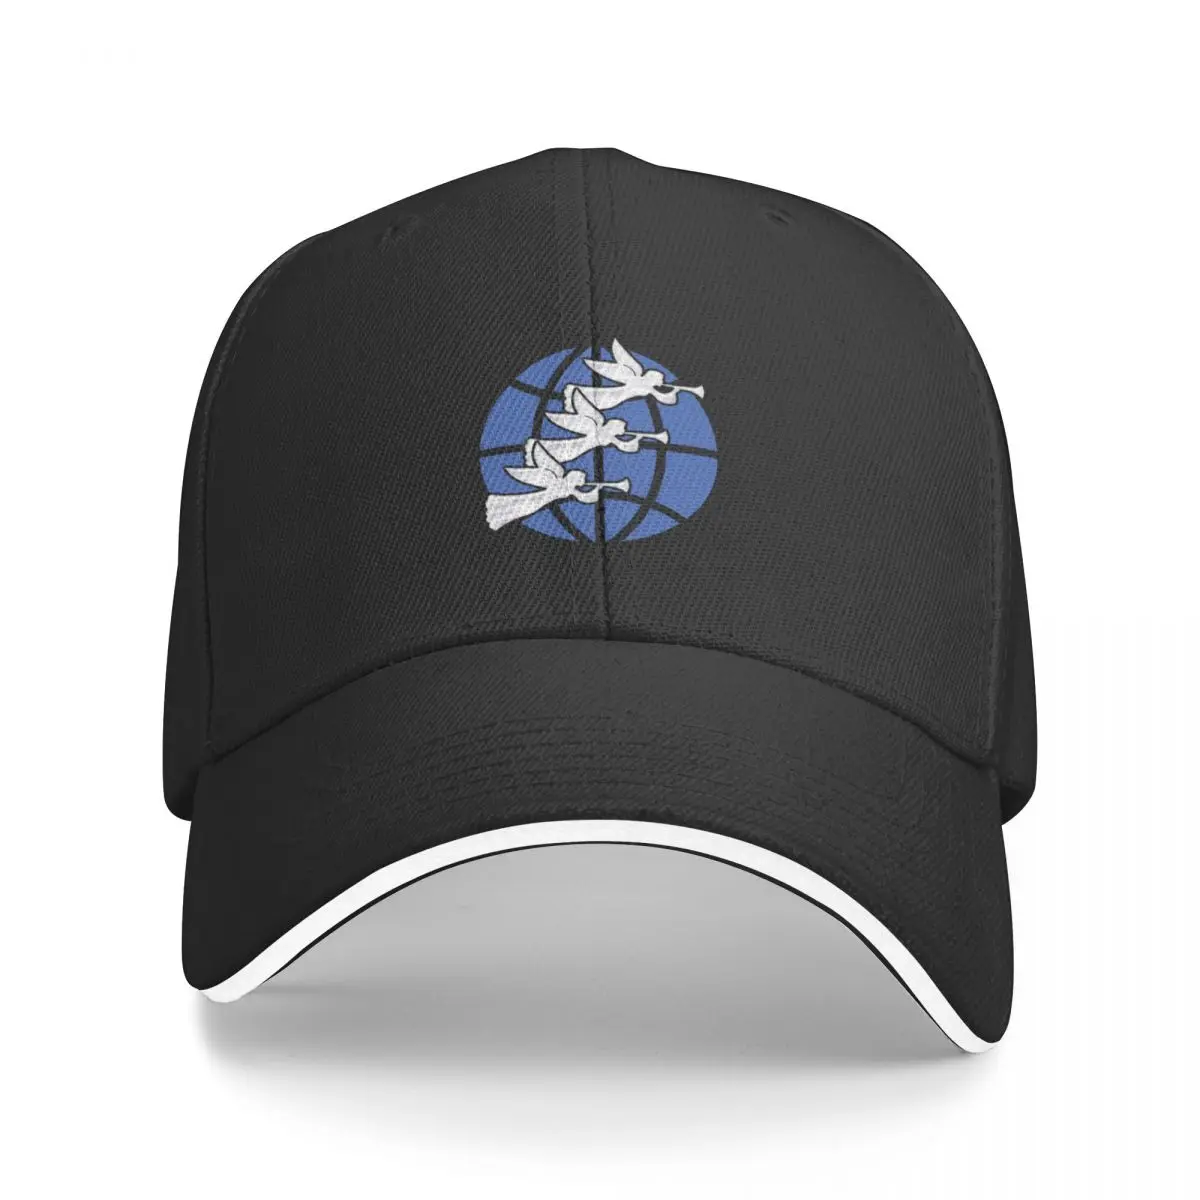 

New Seventh-Day Adventist Three Angels Message [ Tell the World ] Baseball Cap Rugby fashionable Caps Women Men's